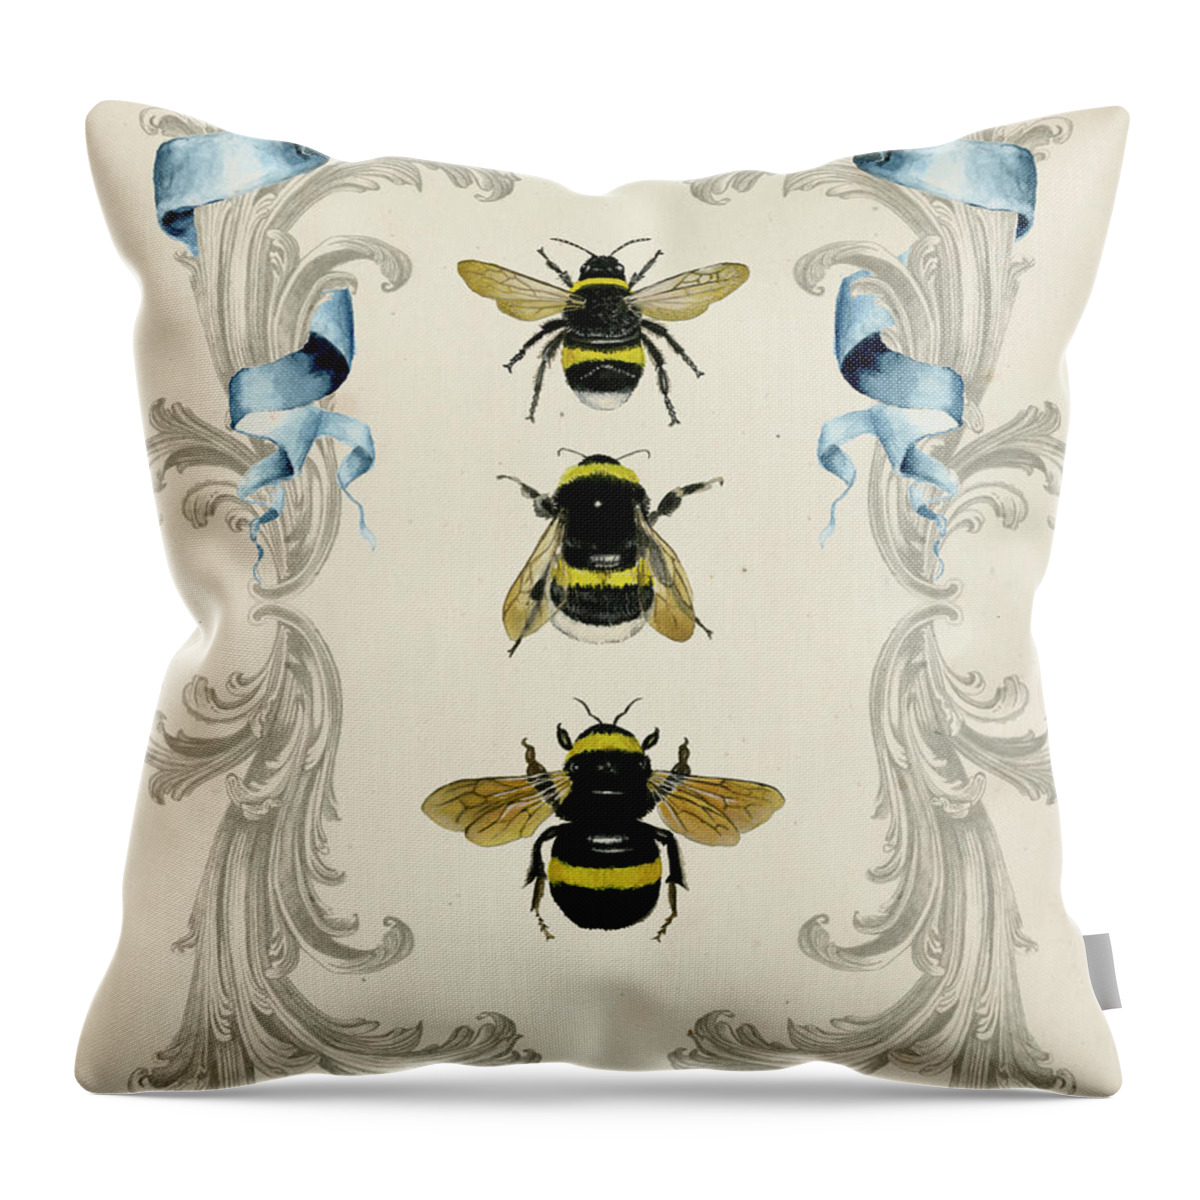 Animals Throw Pillow featuring the painting Bees & Filigree I by Naomi Mccavitt